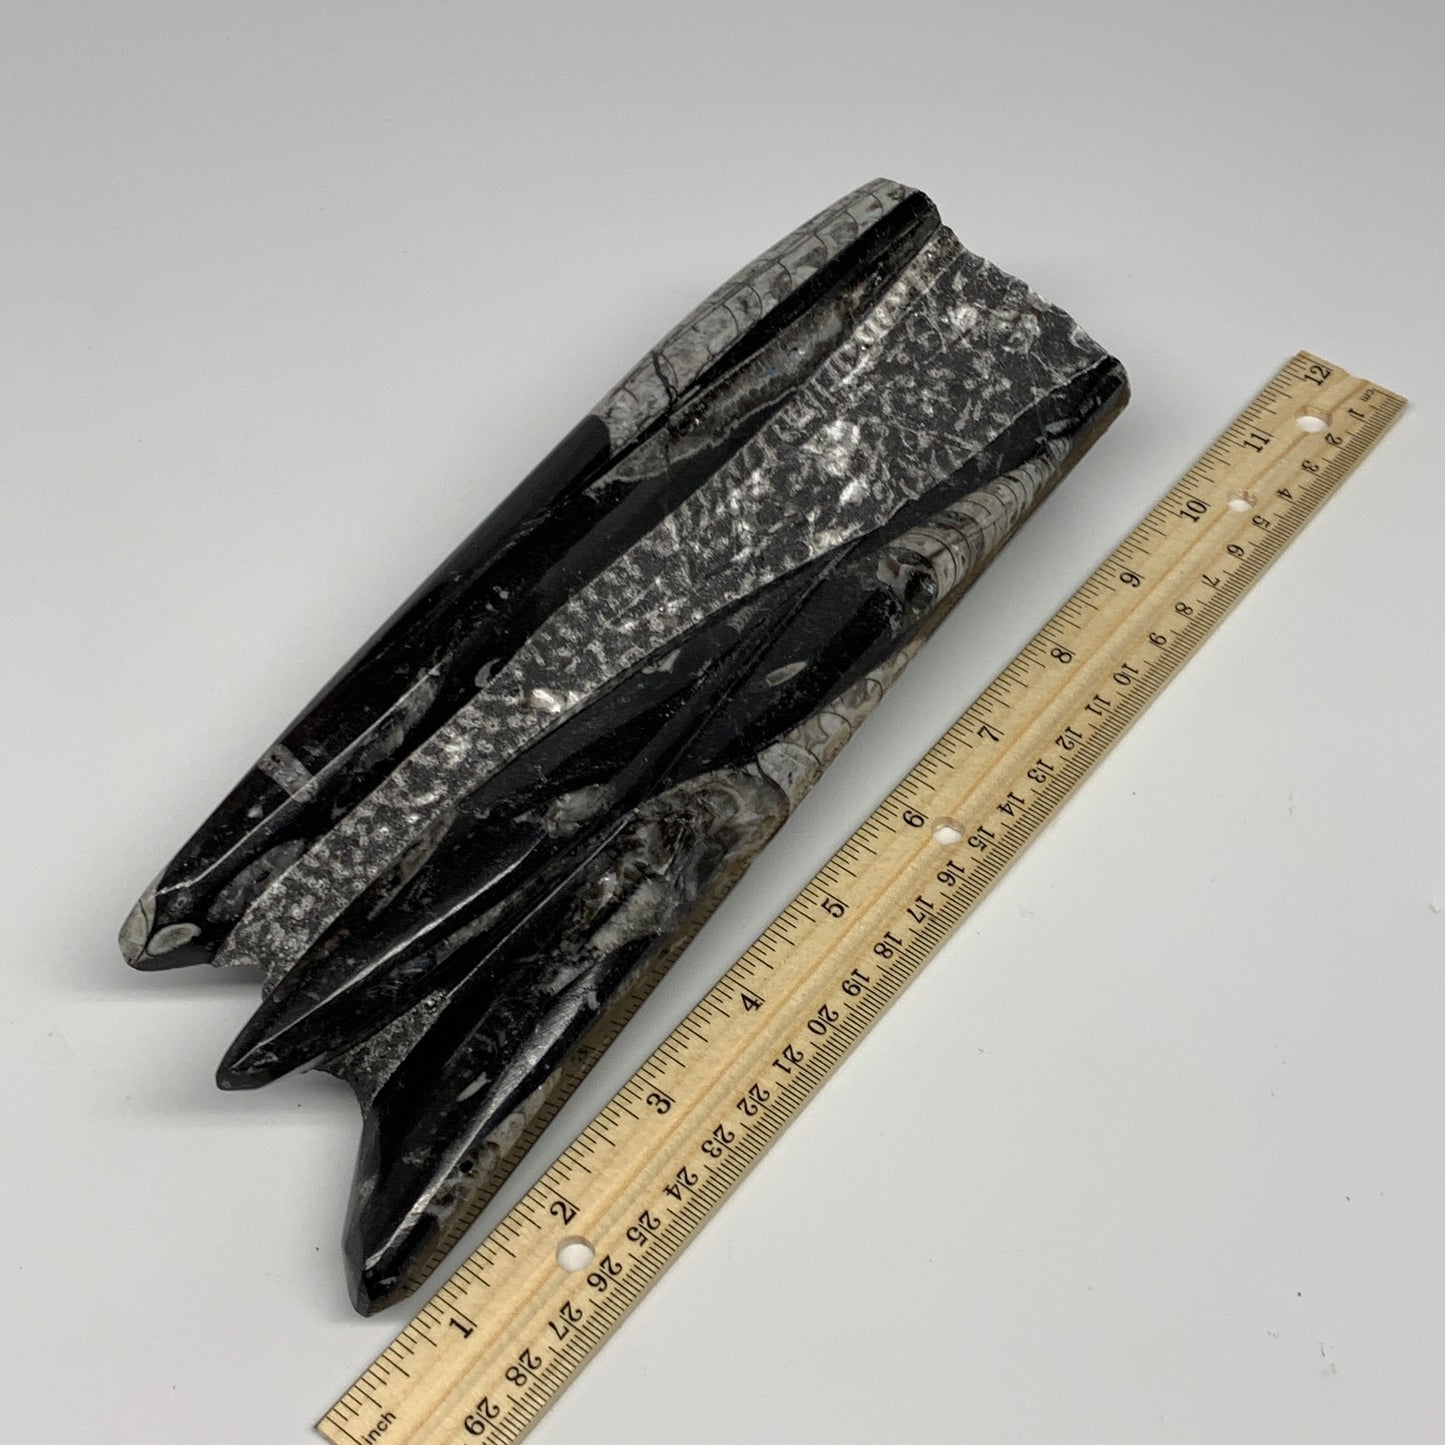 1210g, 6.9"x3.1"2.3" Black Fossils Orthoceras Sculpture Tower @Morocco, B23409